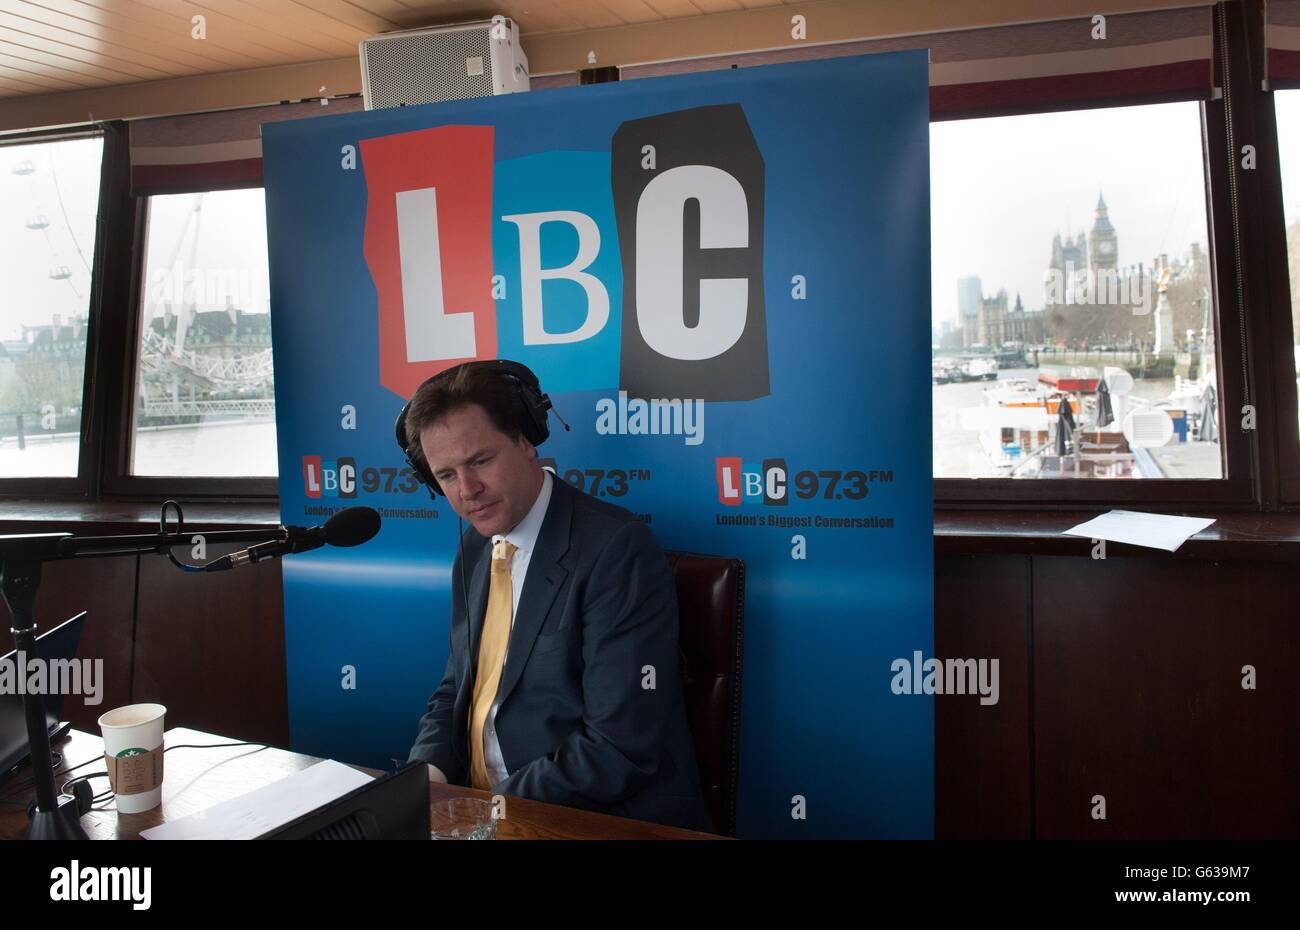 Deputy Prime Minister Nick Clegg co-hosts his weekly phone in radio show with LBC's Nick Ferrari (not pictured) on the moored boat the Tattersall Castle on the River Thames in London, where he was questioned by voters. Stock Photo